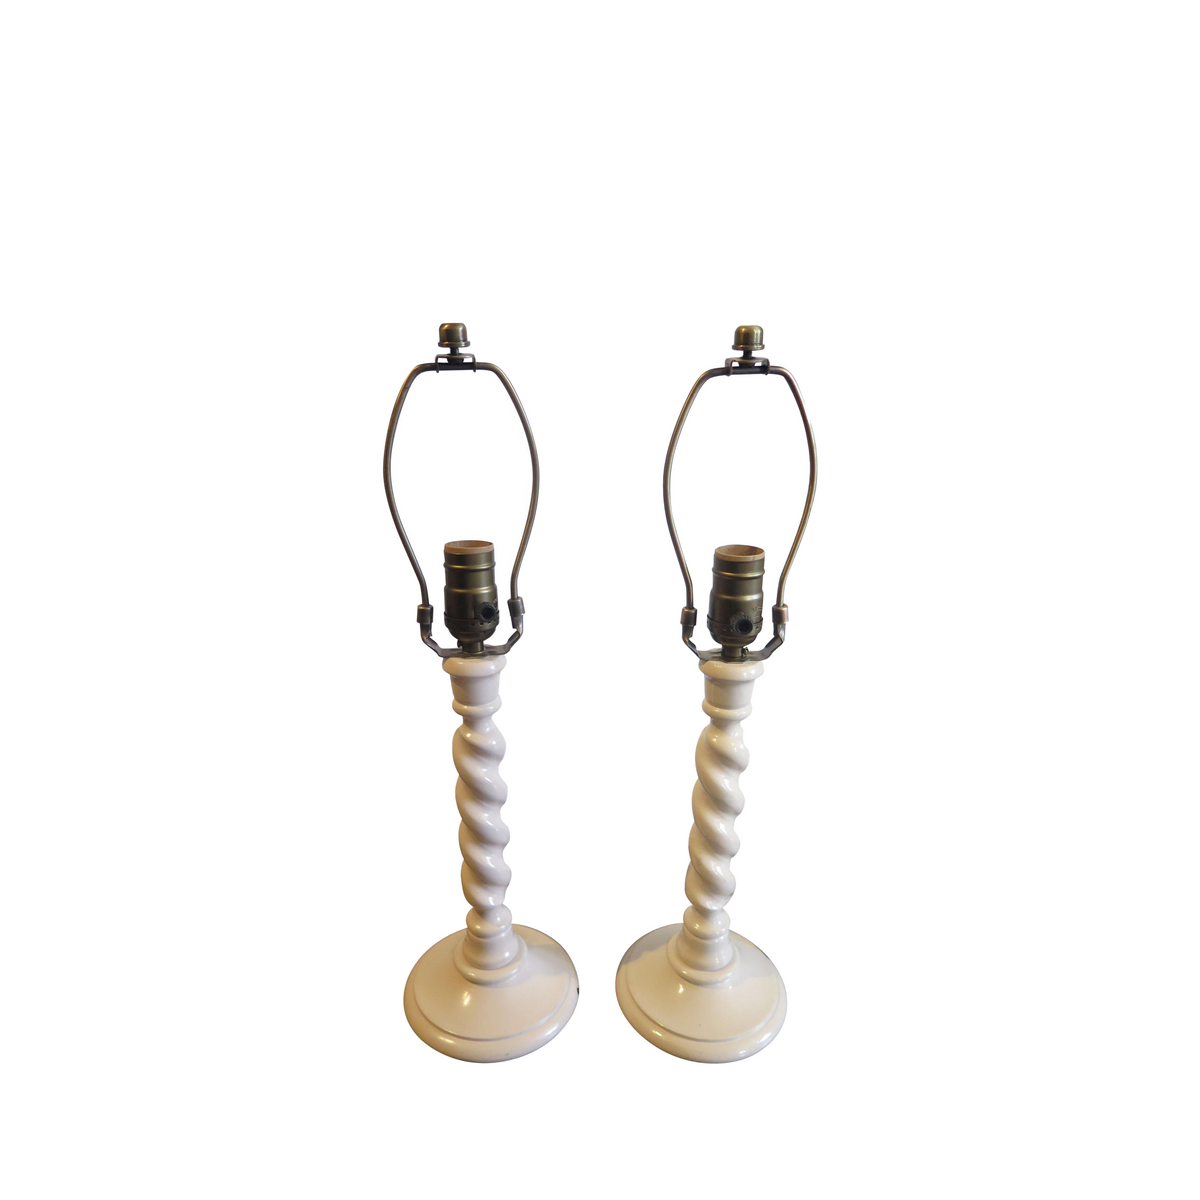 Pair of Ivory Twisted Candlestick Table Lamps